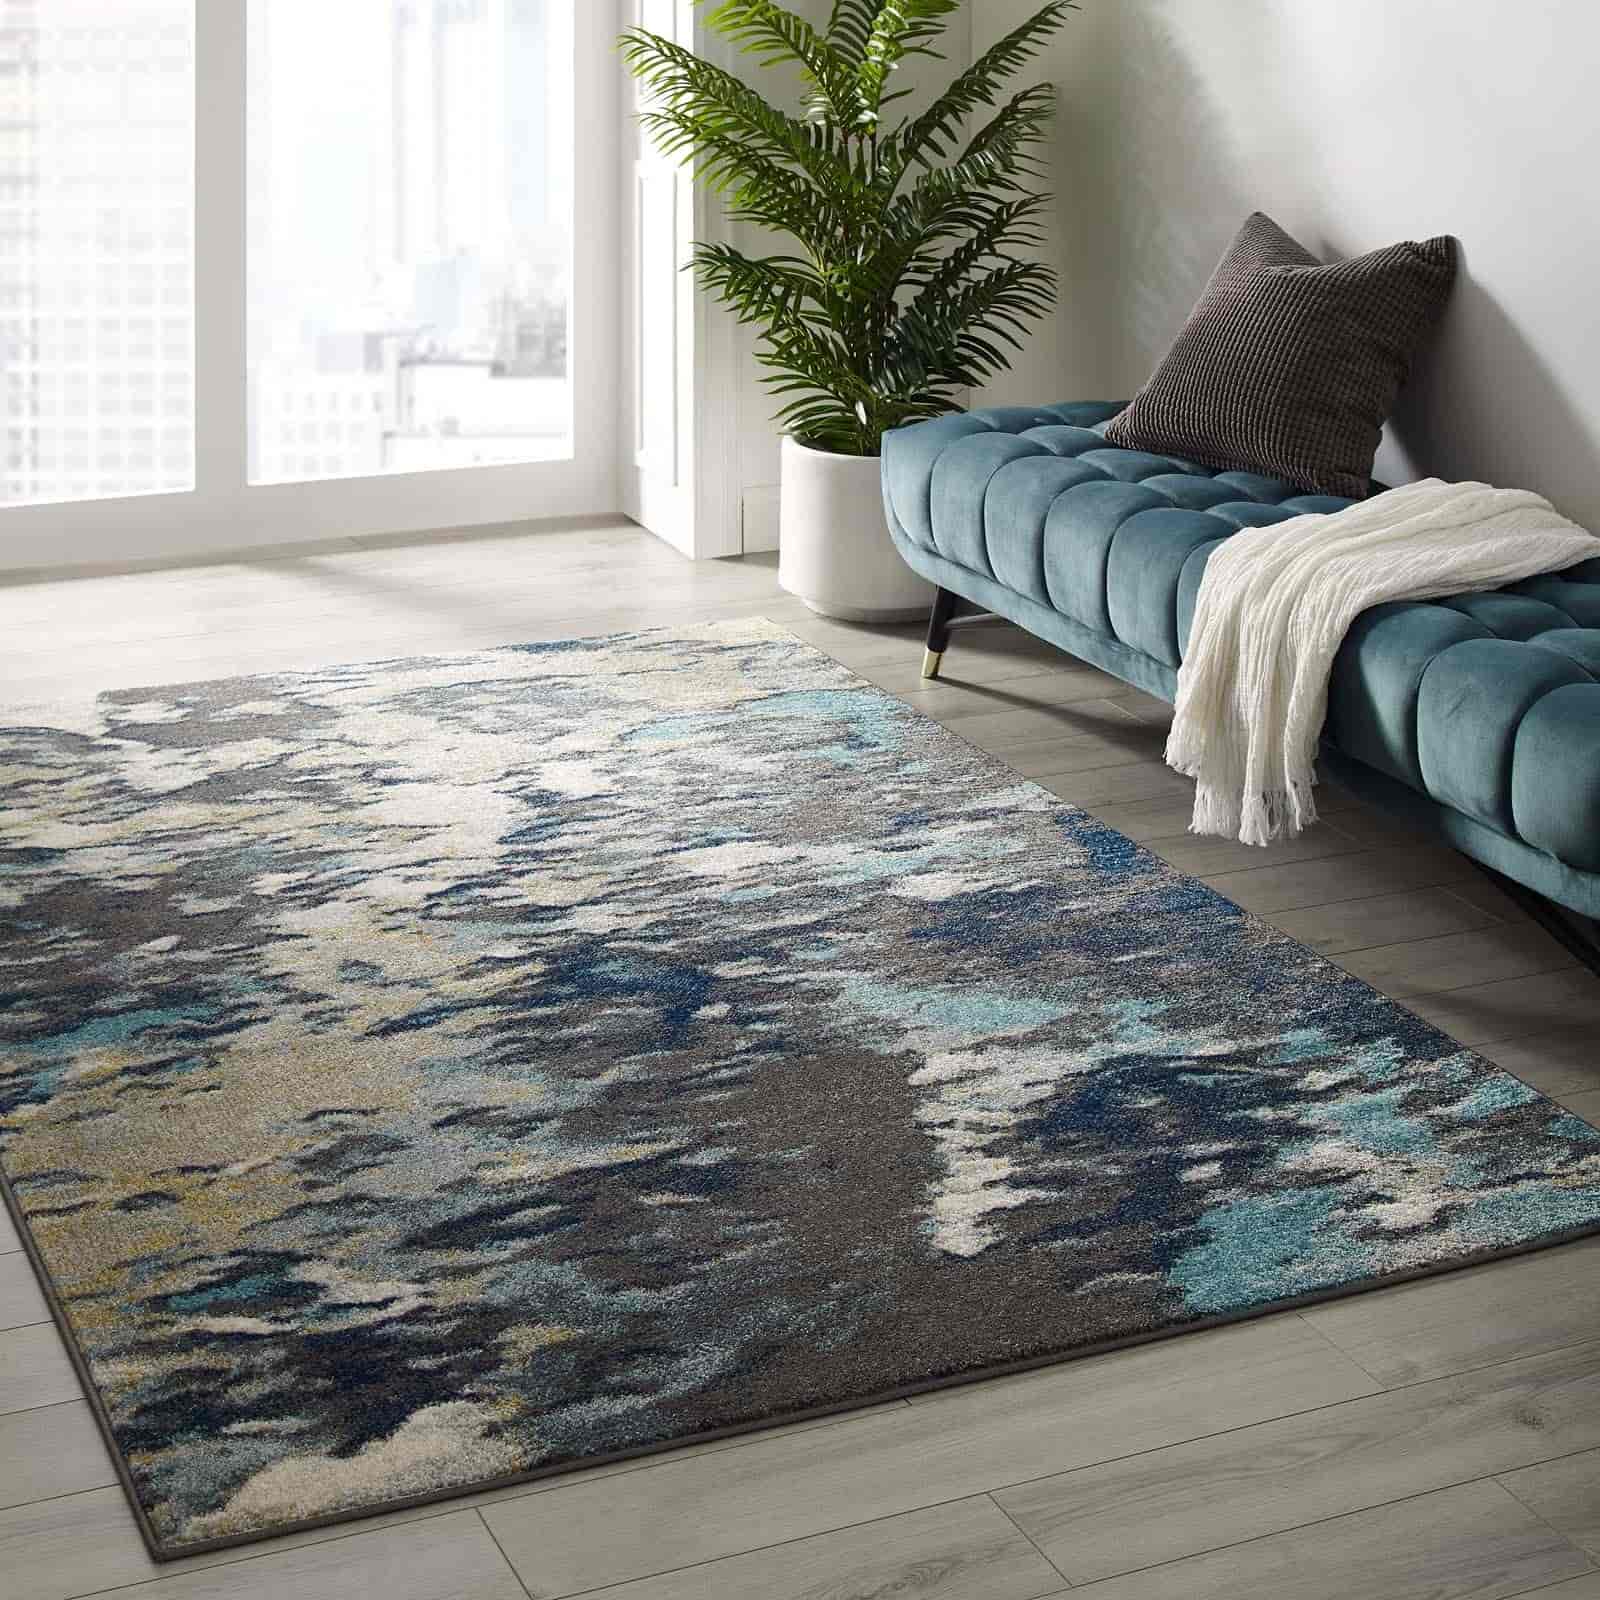 subdued black, white and blue rugs in a room